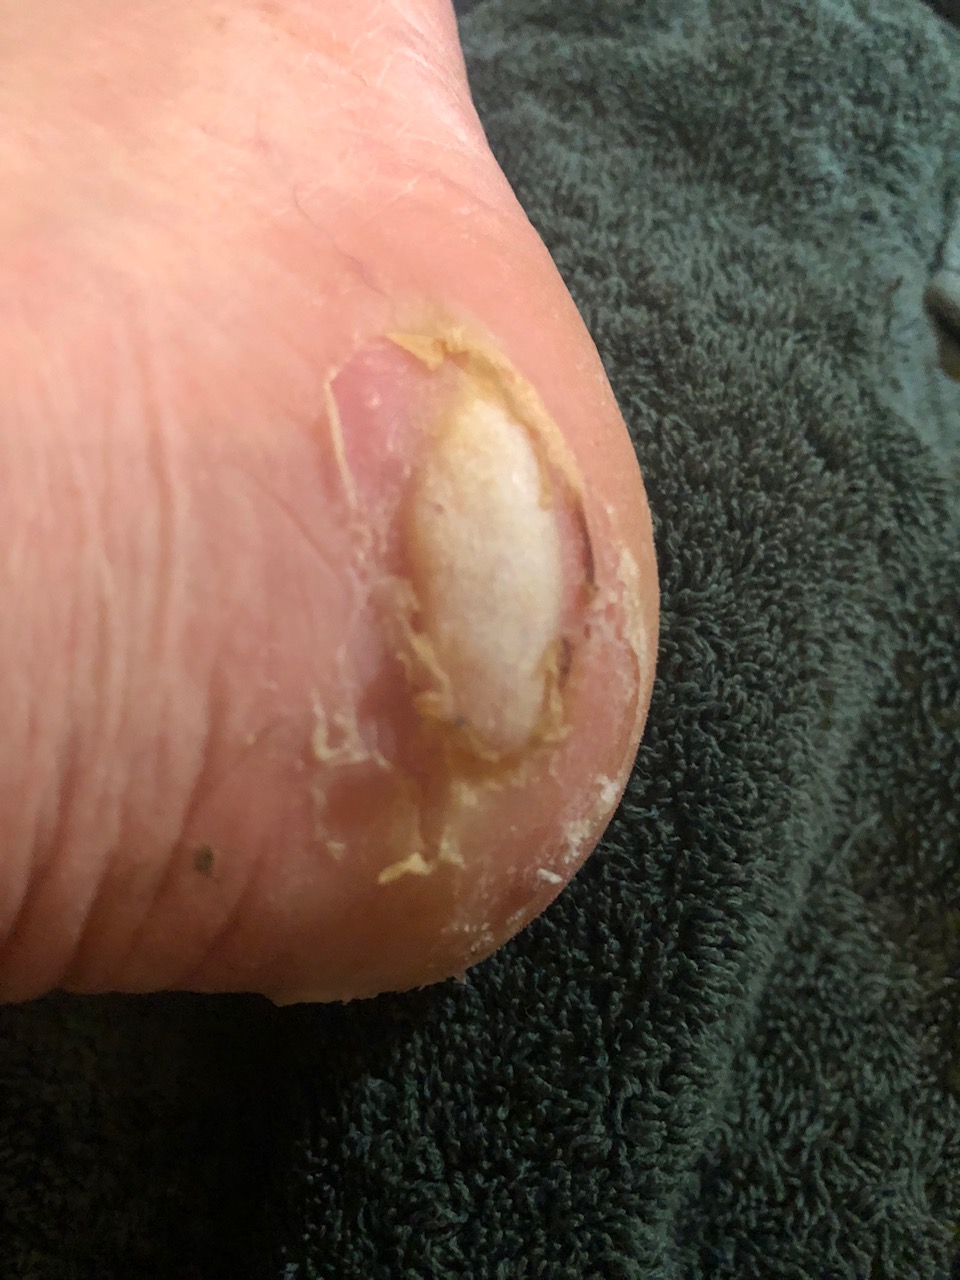 Right foot outer heel showing a very deep blister